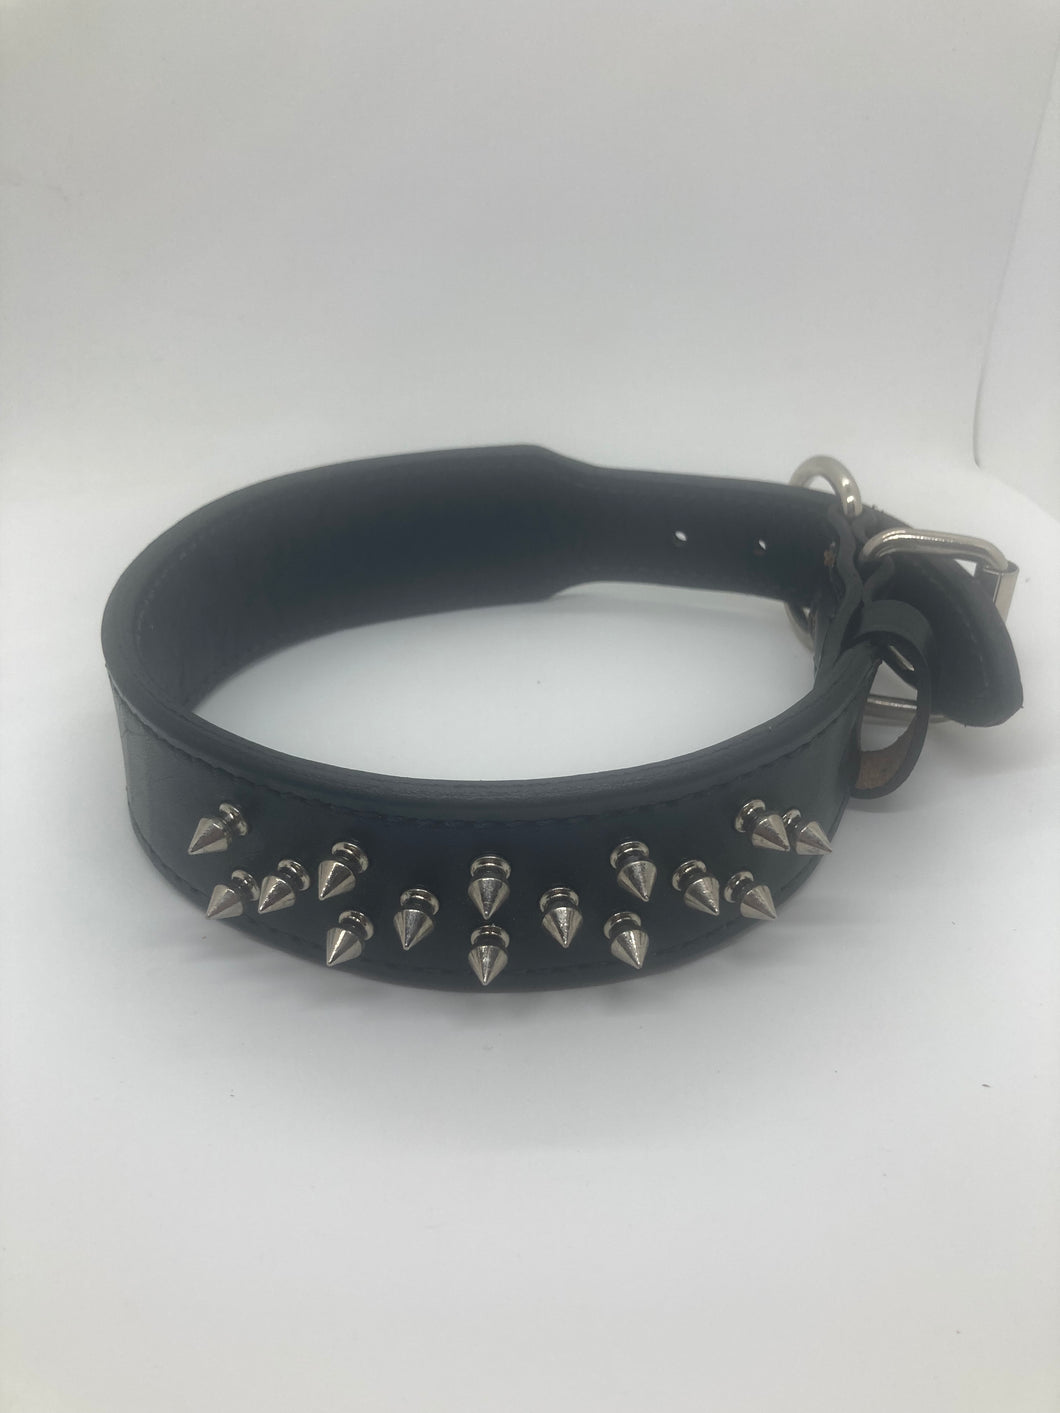 20” leather spiked collar